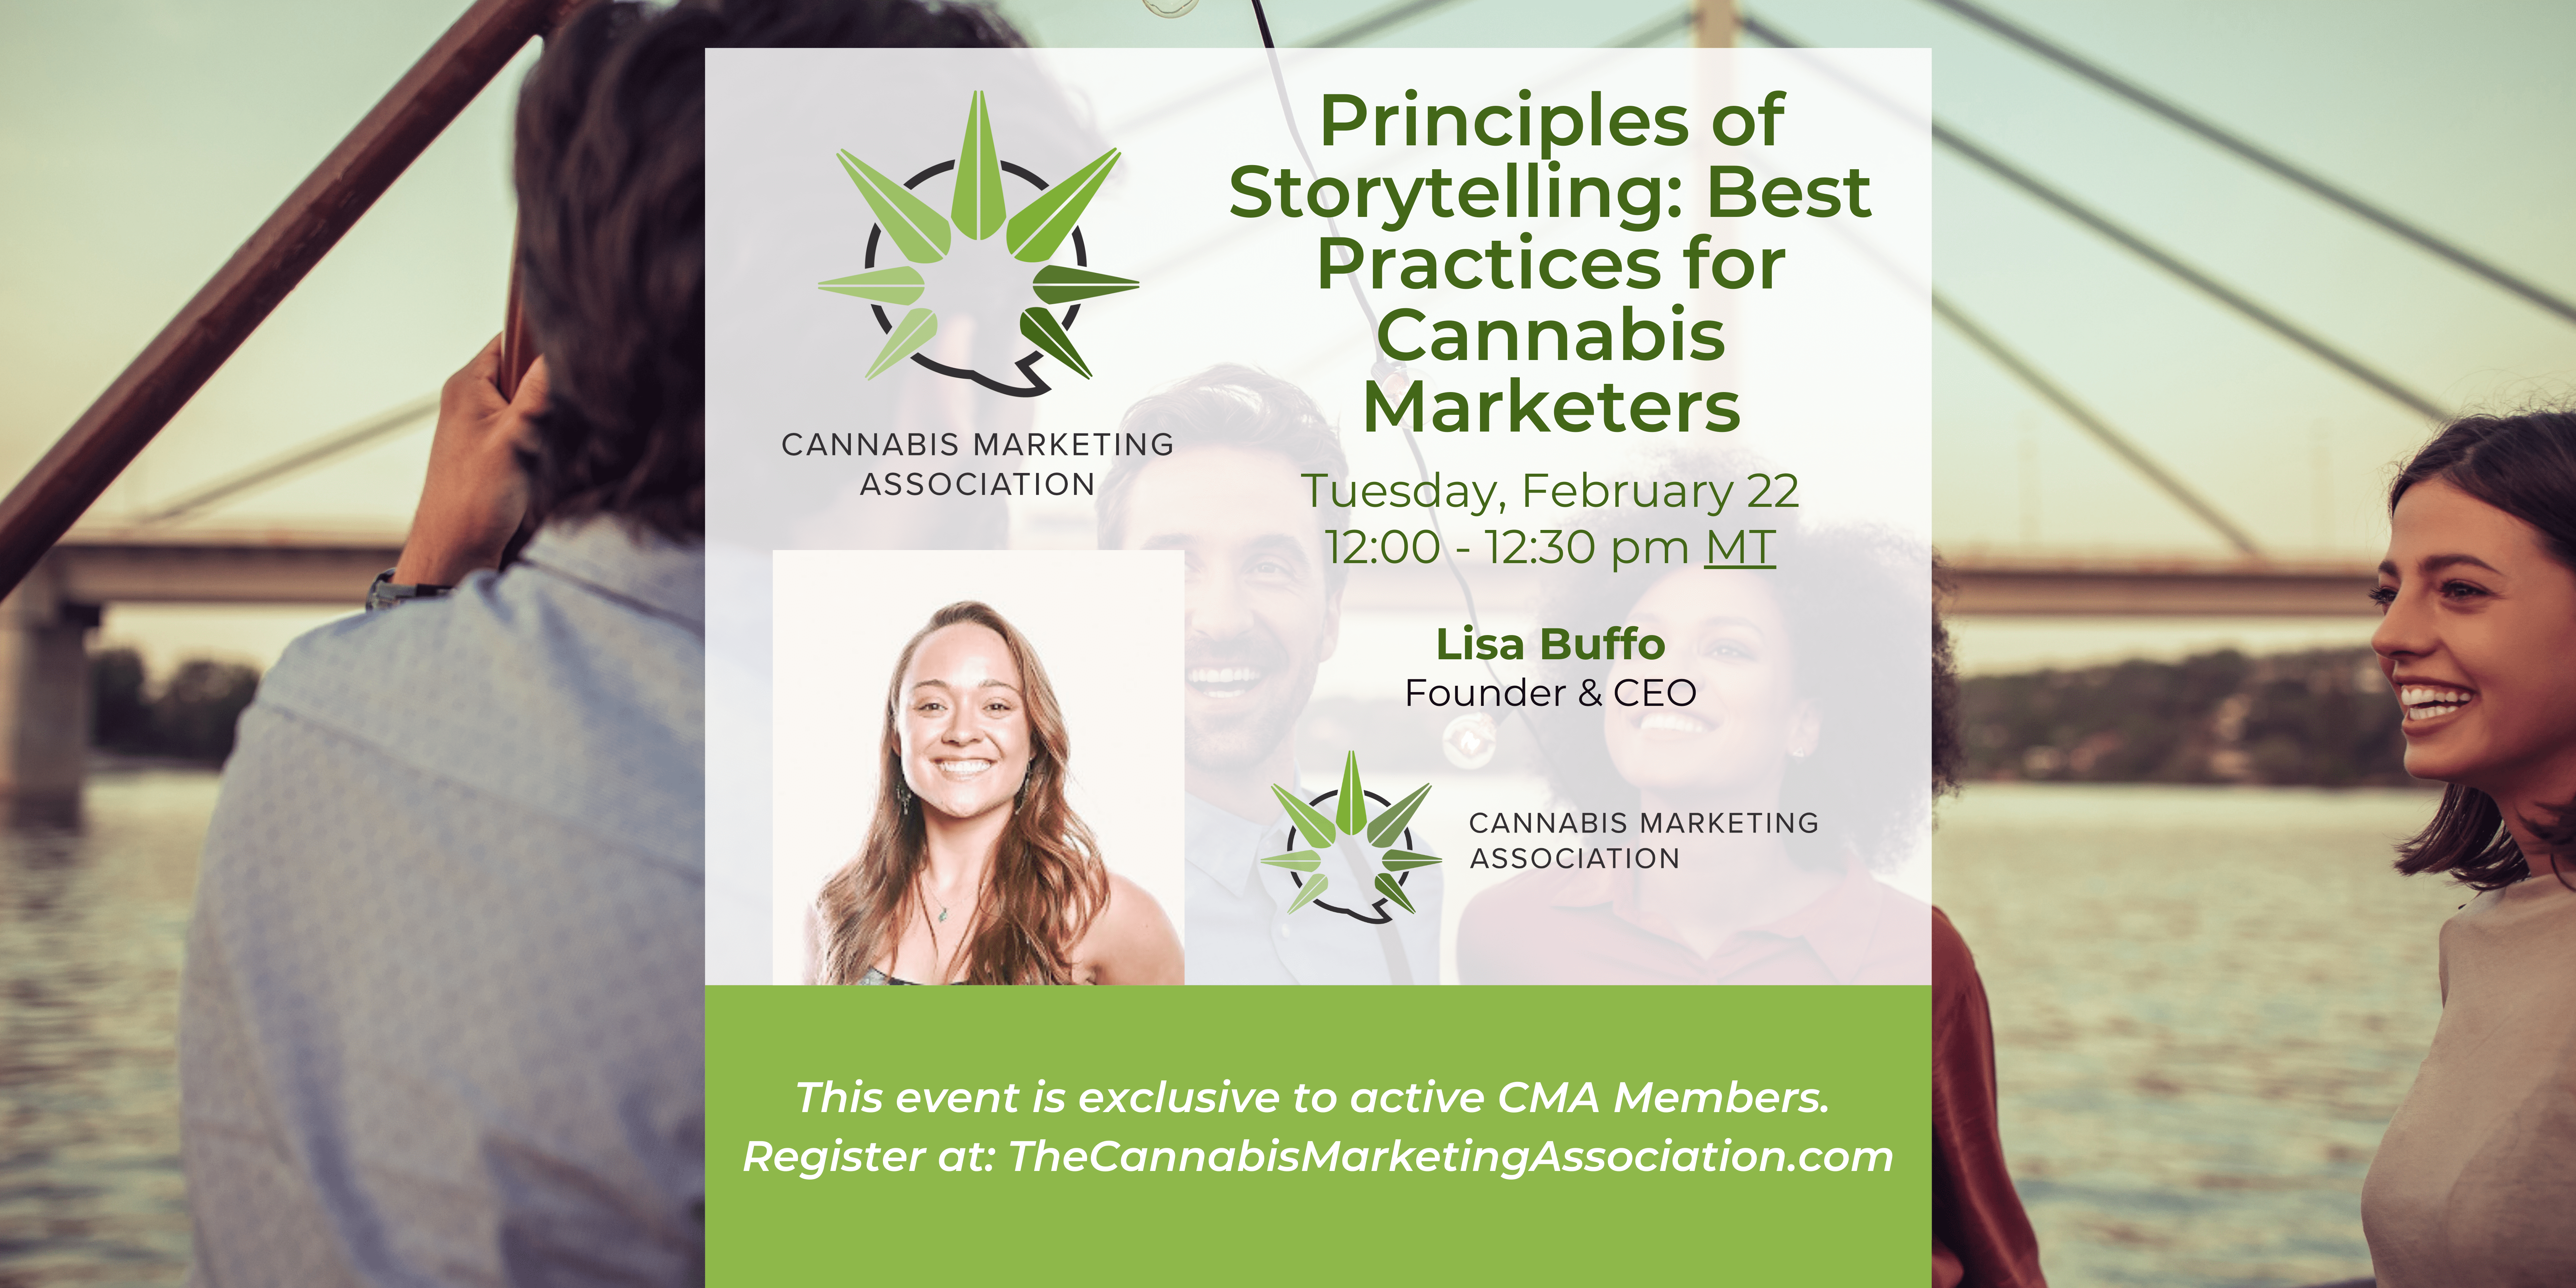 Principles of Storytelling: Best Practices for Cannabis Marketers